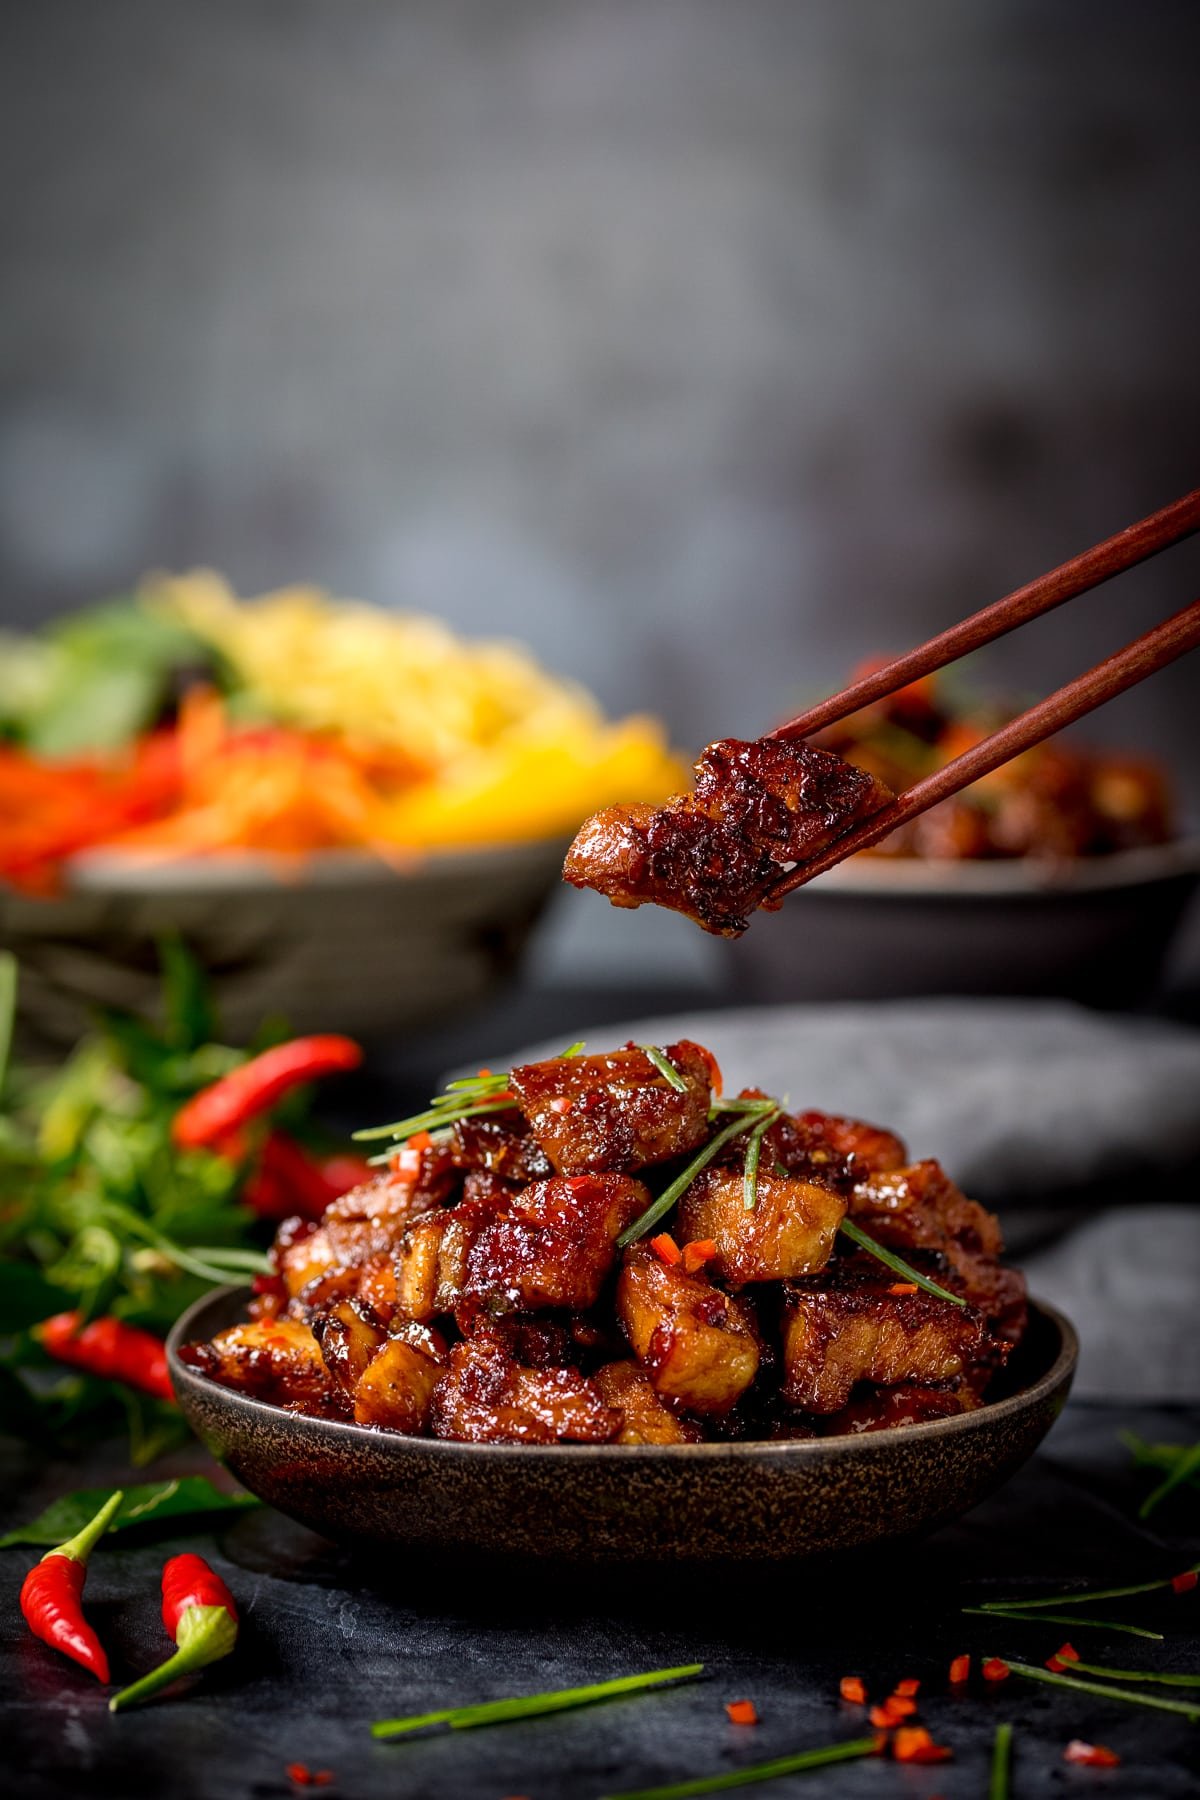 A bowl of Chinese sticky pork belly pieces against a dark background. There is a piece being lifted from the bowl with a pair of wooden chopsticks. There are ingredients scattered around and a bowl of colourful vegetables in the background.